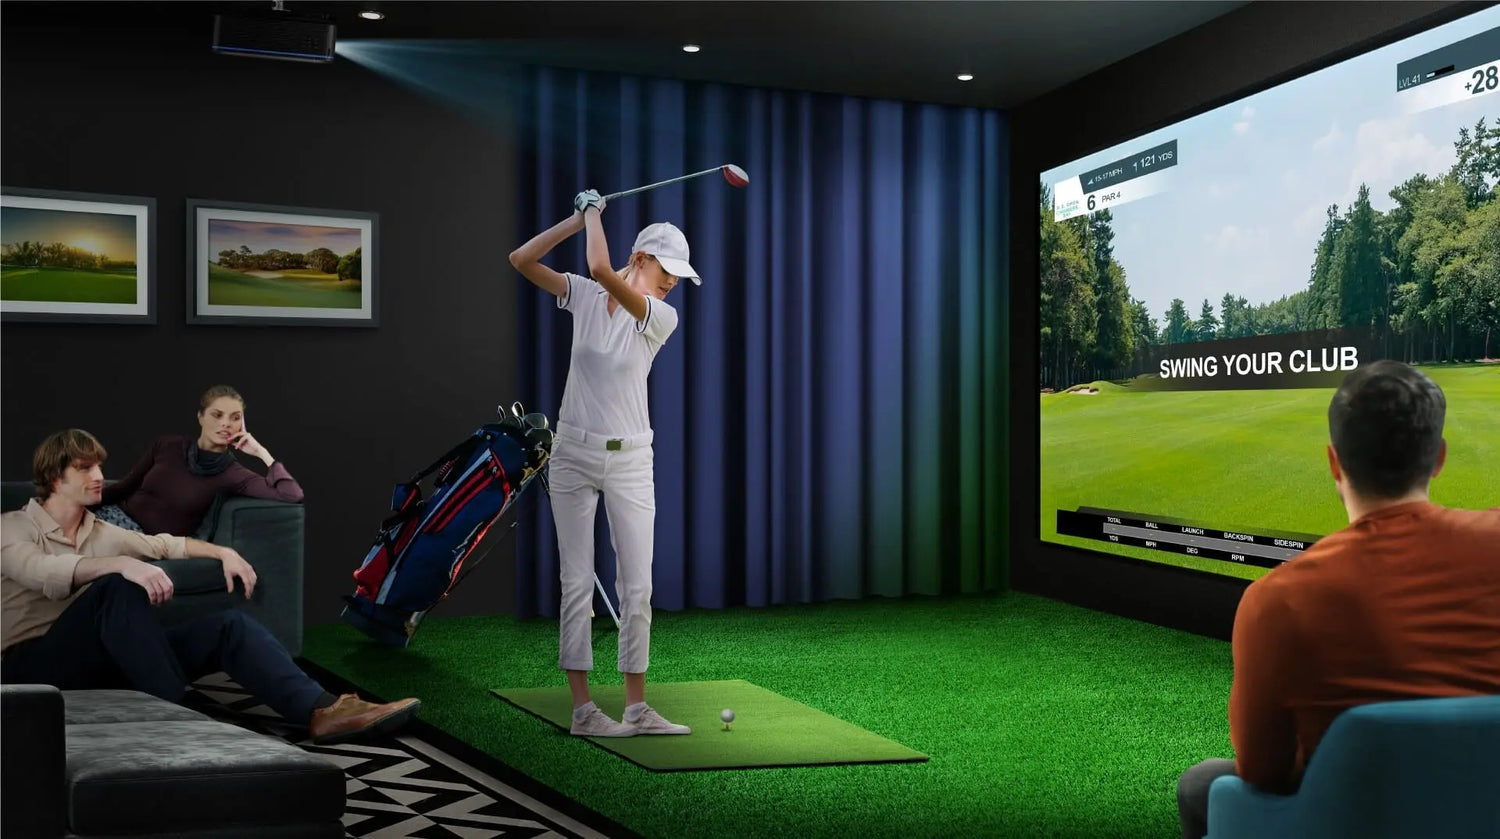 What Technology Components do I need to build my own Golf Simulator? Masters Voice Audio Visual